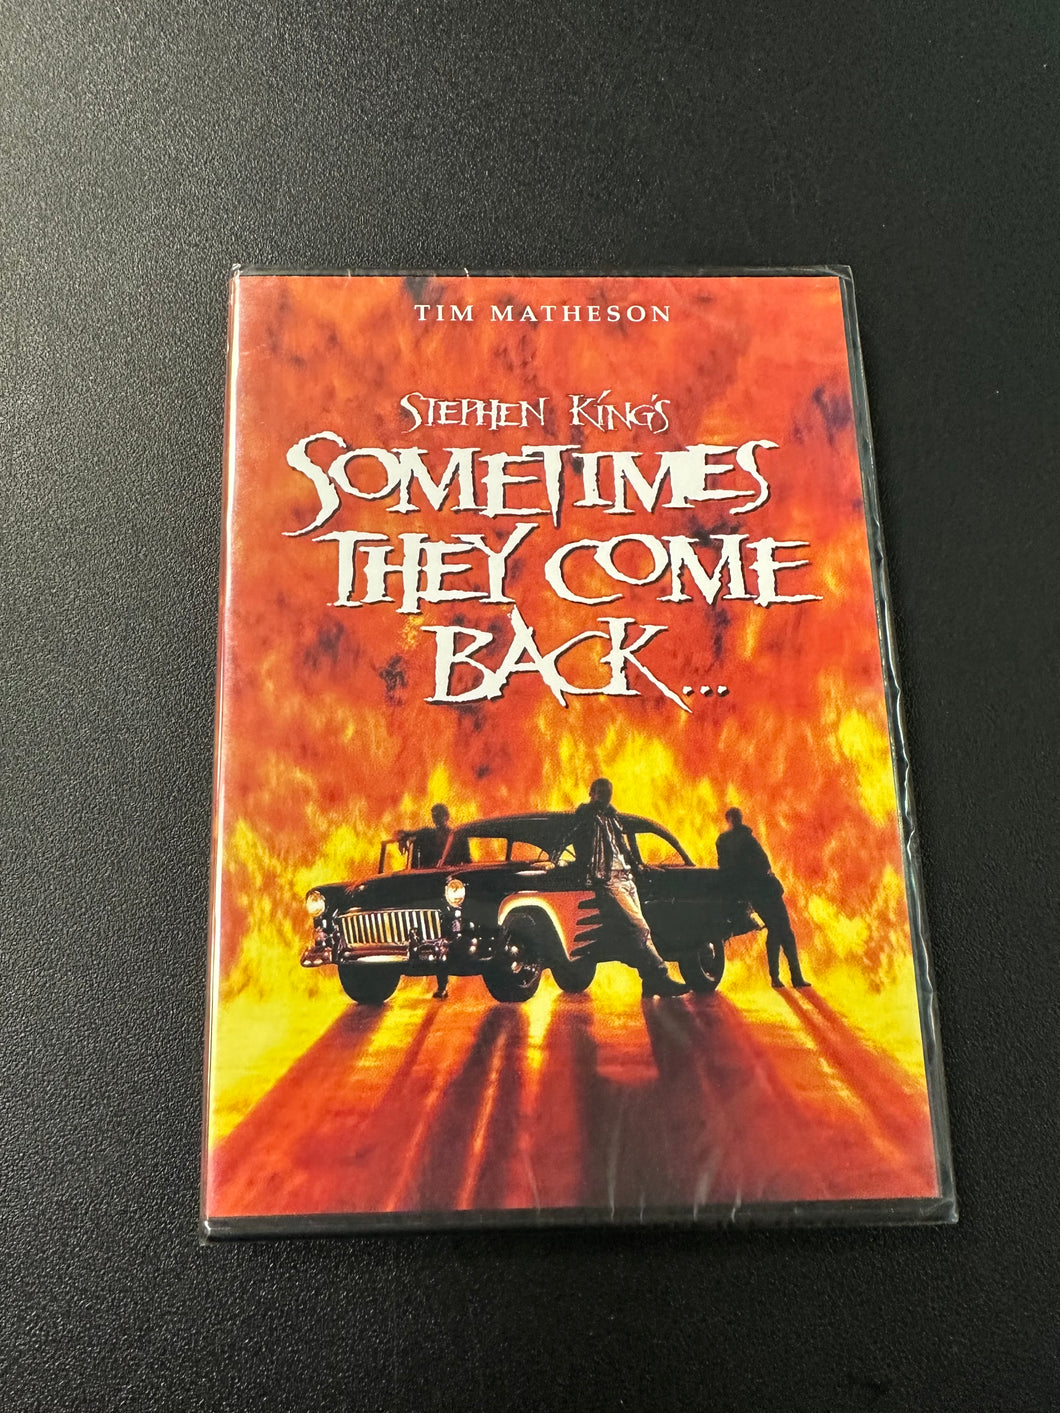 Stephen King’s Sometimes They Come Back [DVD] (NEW) Sealed